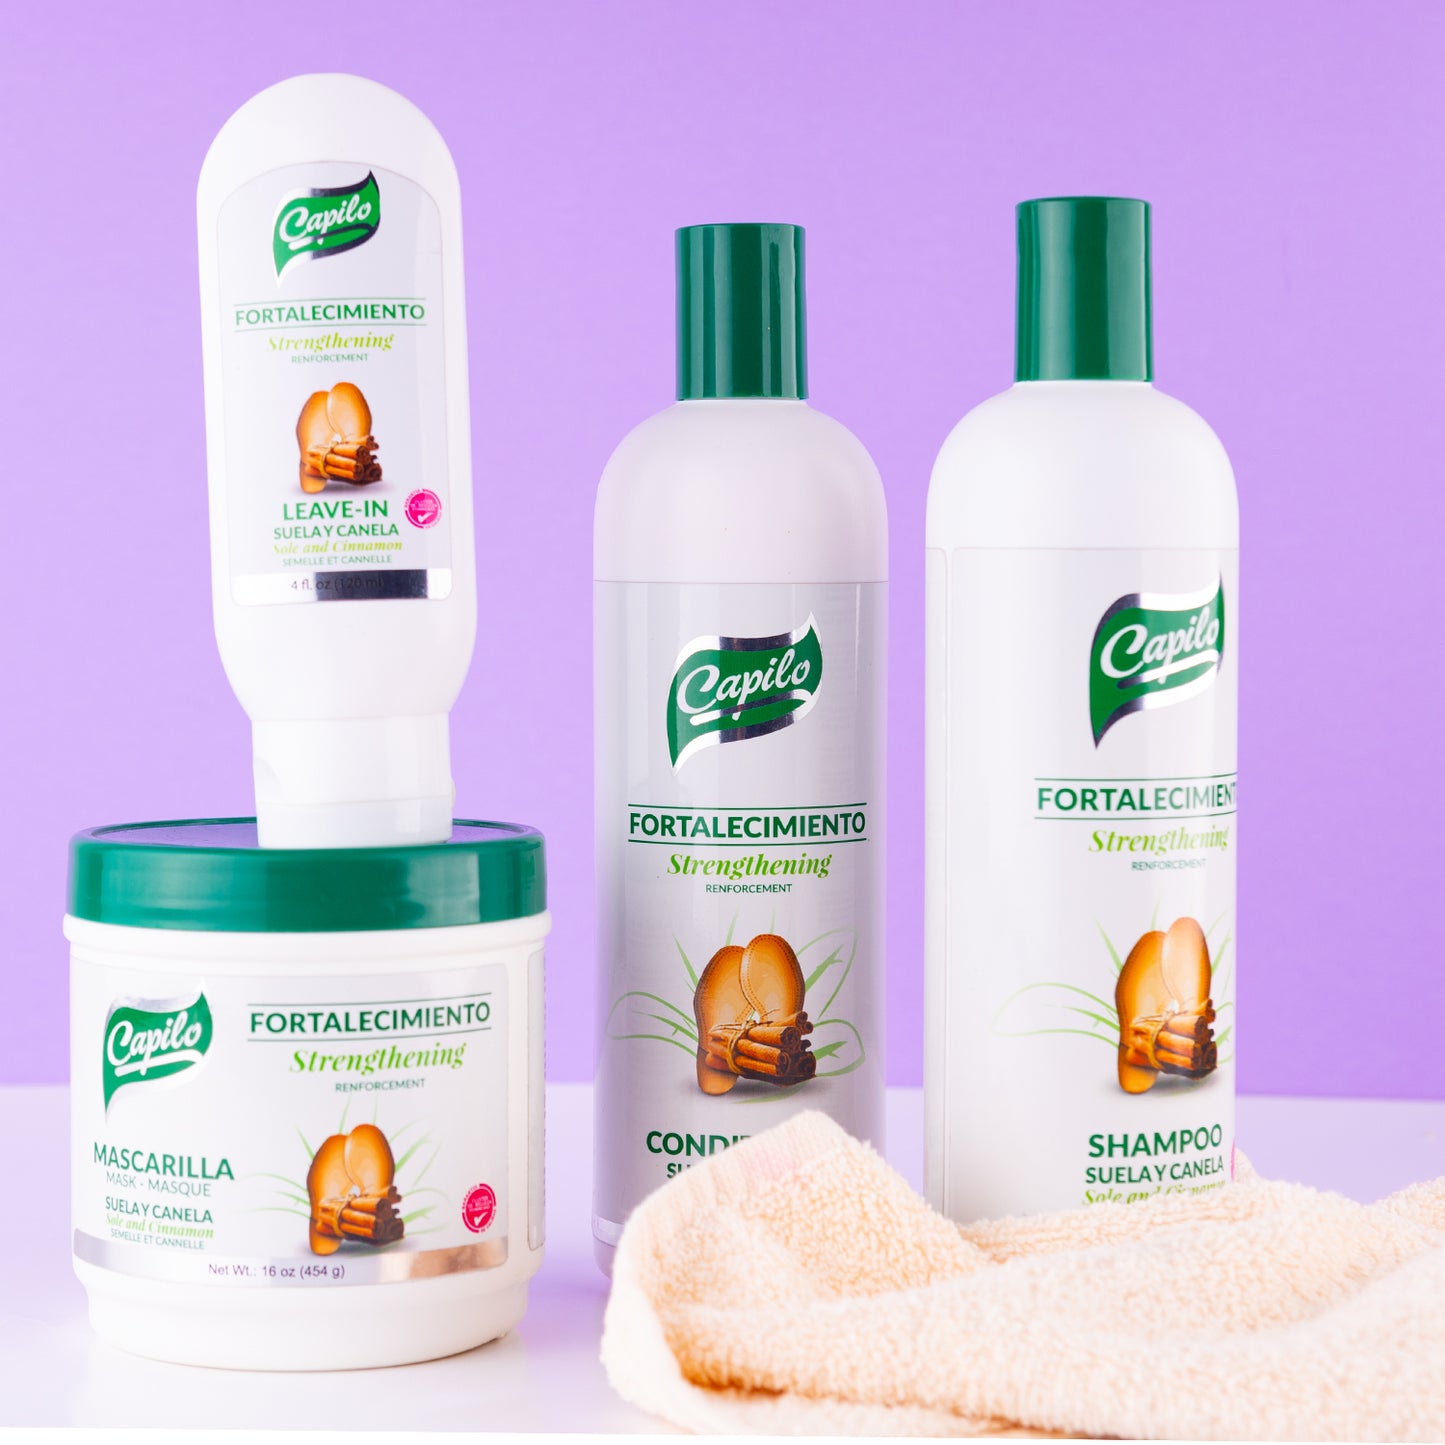 Capilo Sole and Cinnamon Hair Care Line | Strengthening and Hair Thickener | Mineral Oil and Petroleum Jelly Free